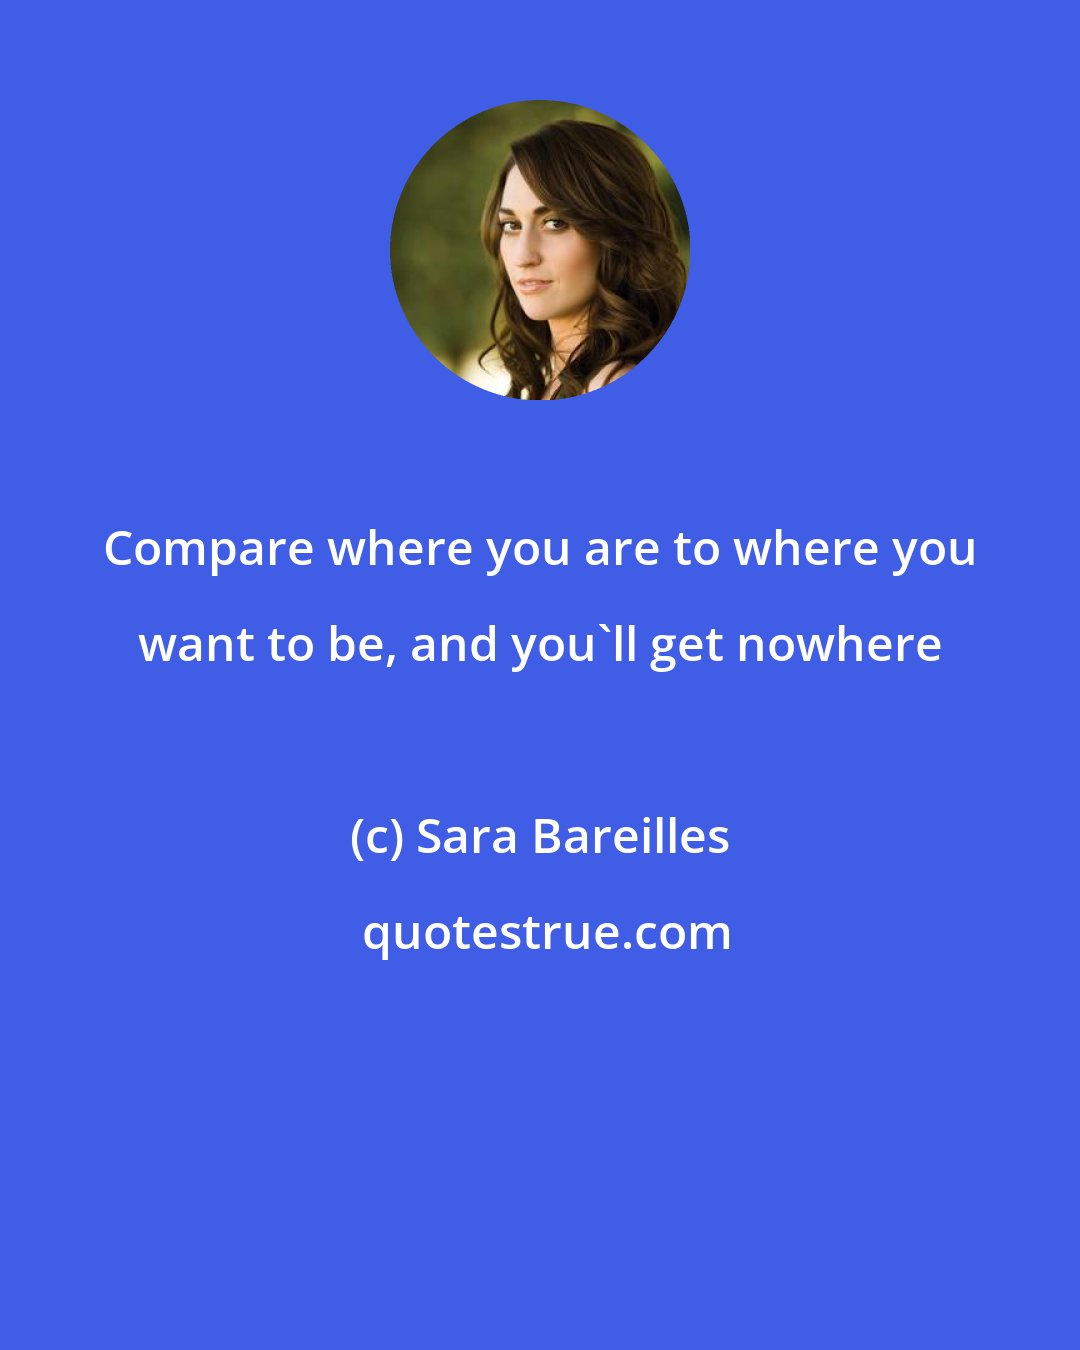 Sara Bareilles: Compare where you are to where you want to be, and you'll get nowhere